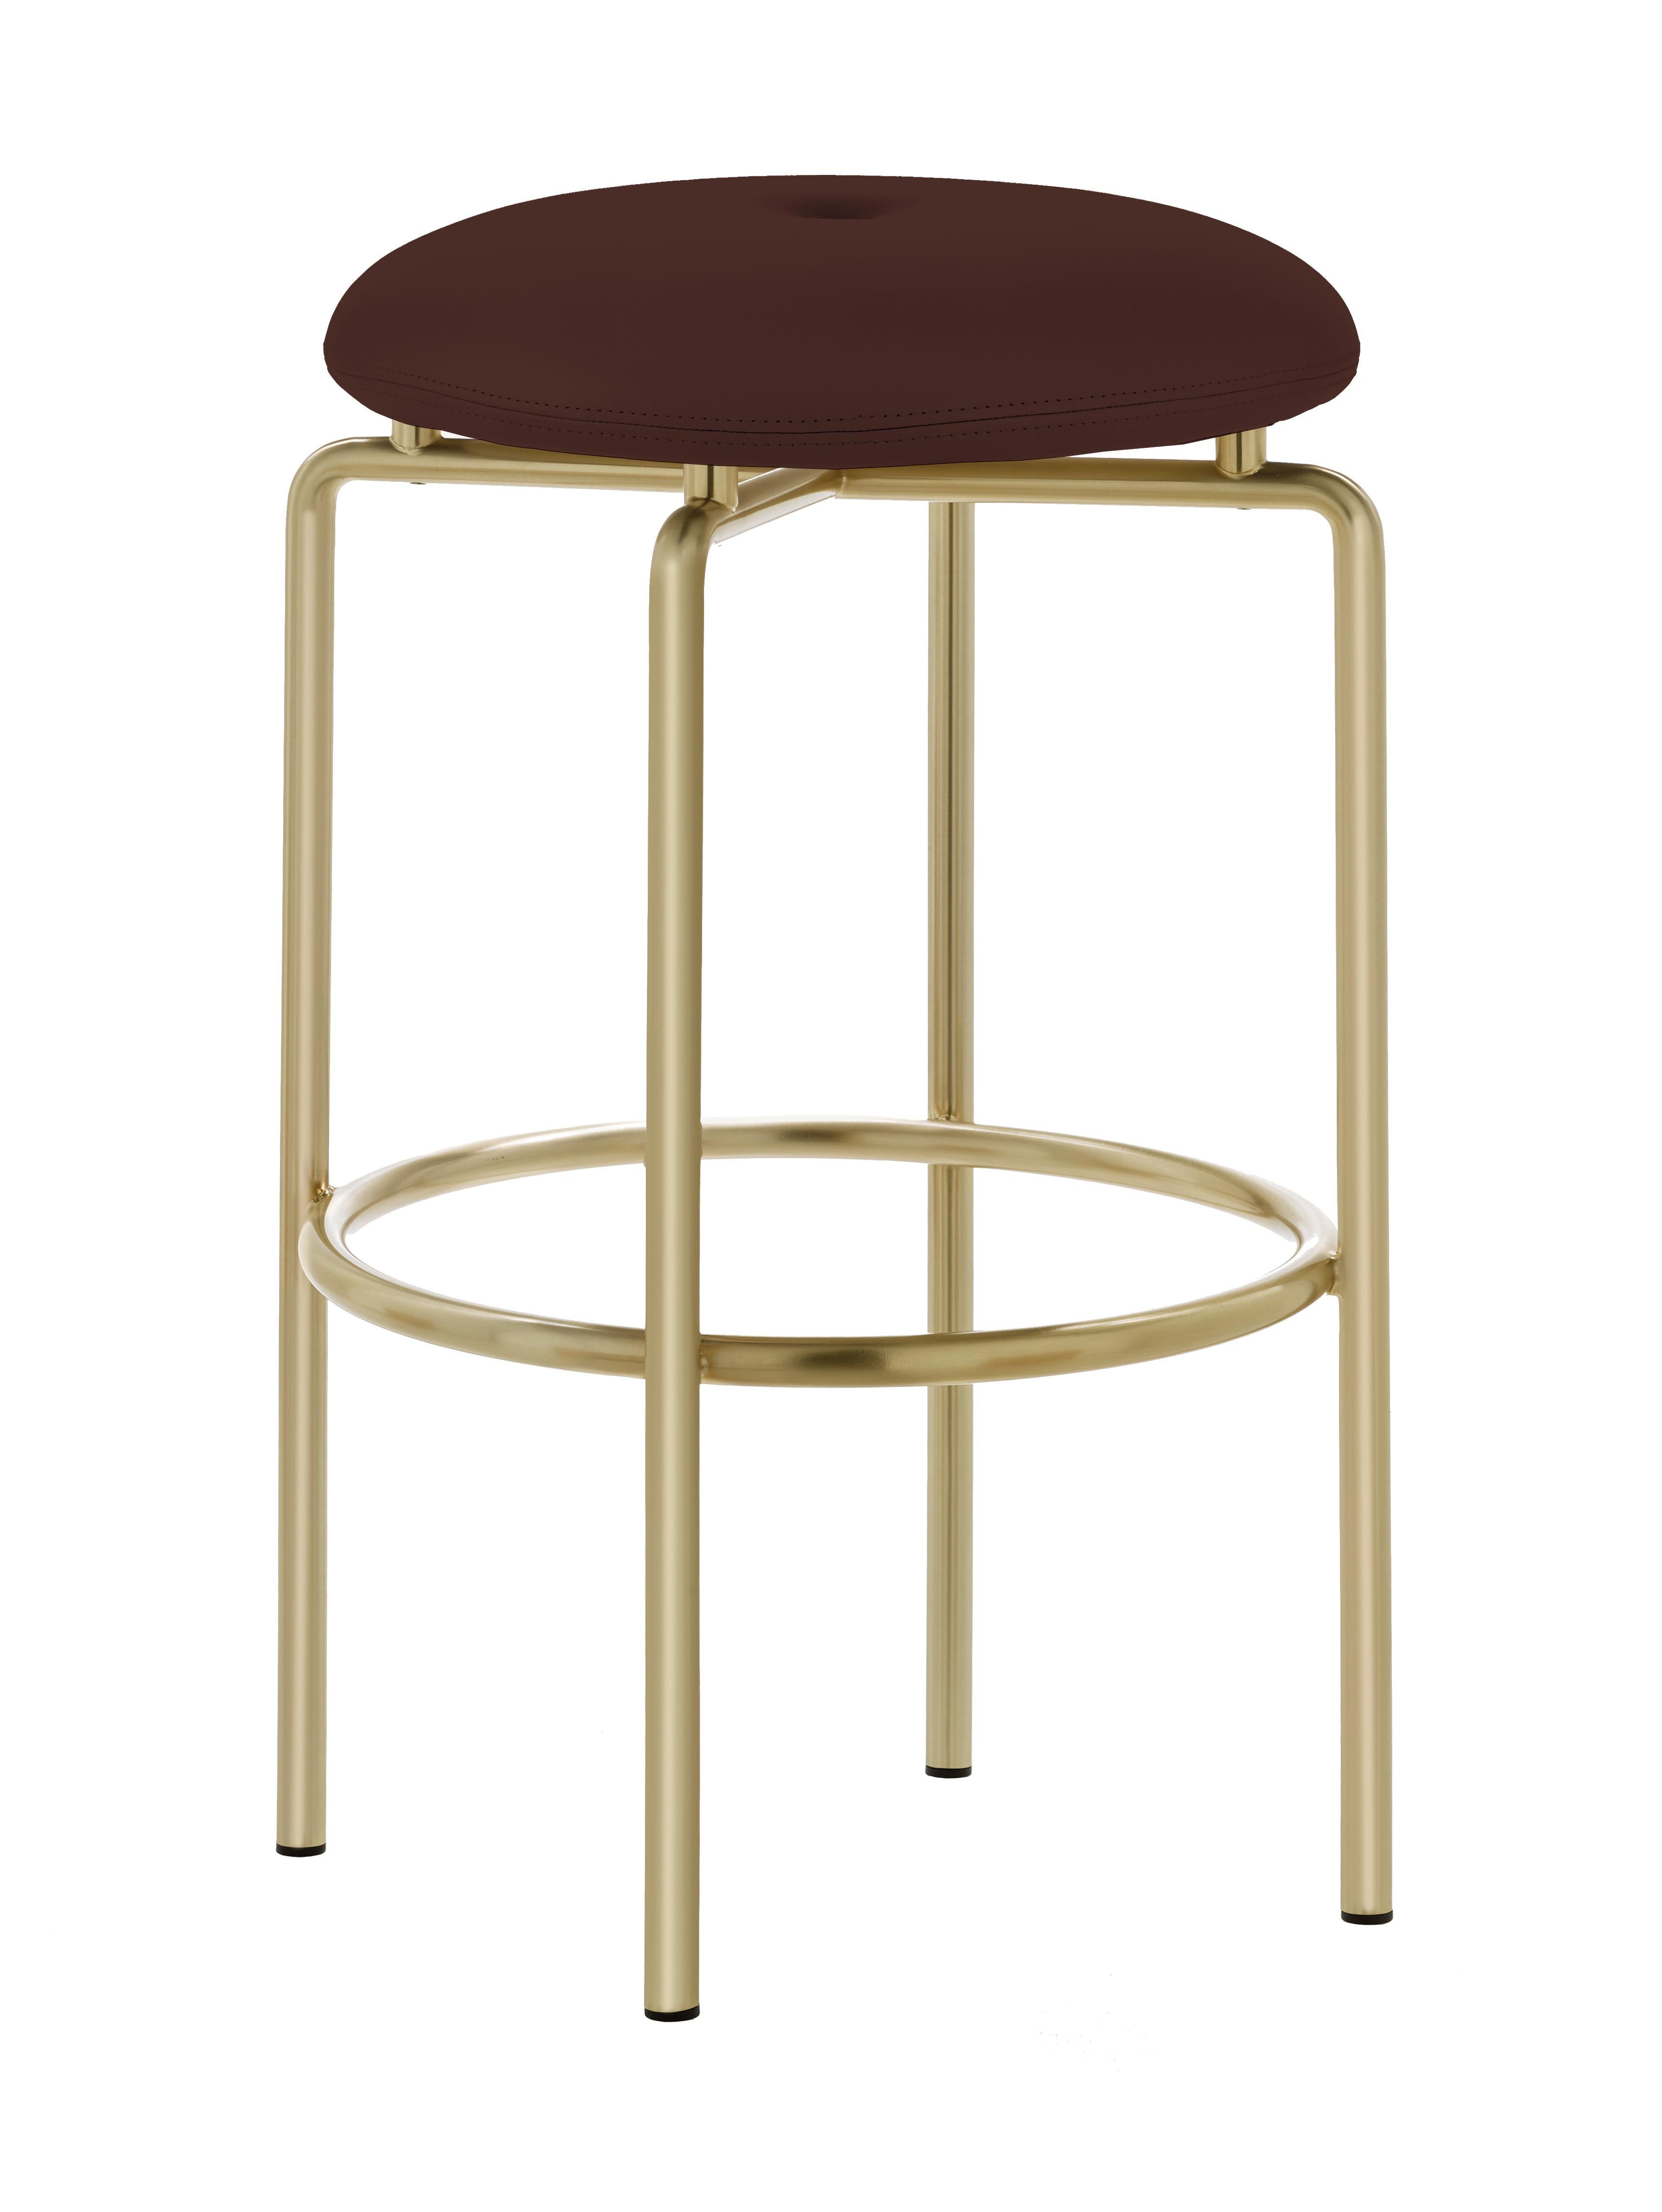 For Sale: Brown (Elegant 93957 Dark Brown) Circular Counter Stool in Satin Brass and Leather Designed by Craig Bassam